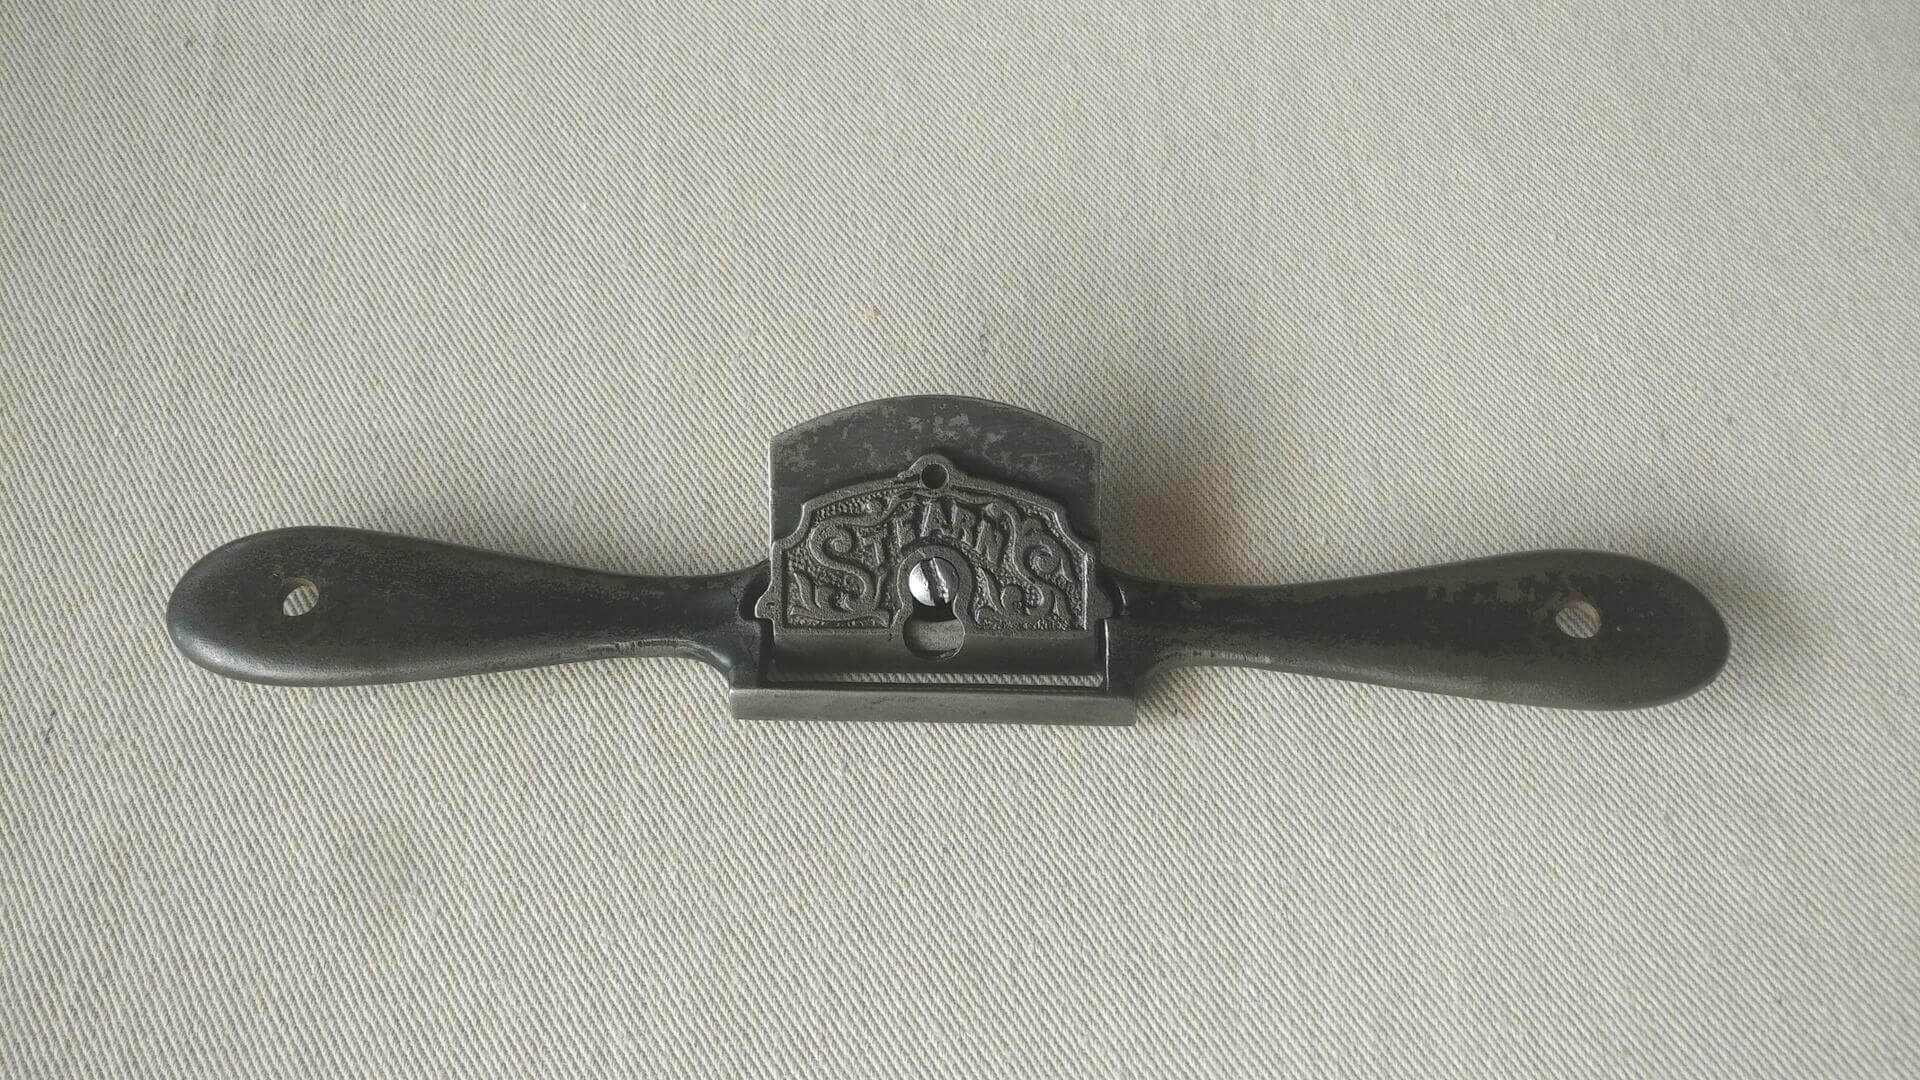 Vintage woodworking spoke shave with beautiful ornate by E.C. Stearns & Company from Syracuse NY. Rare antique made in USA collectible carpentry edge tools